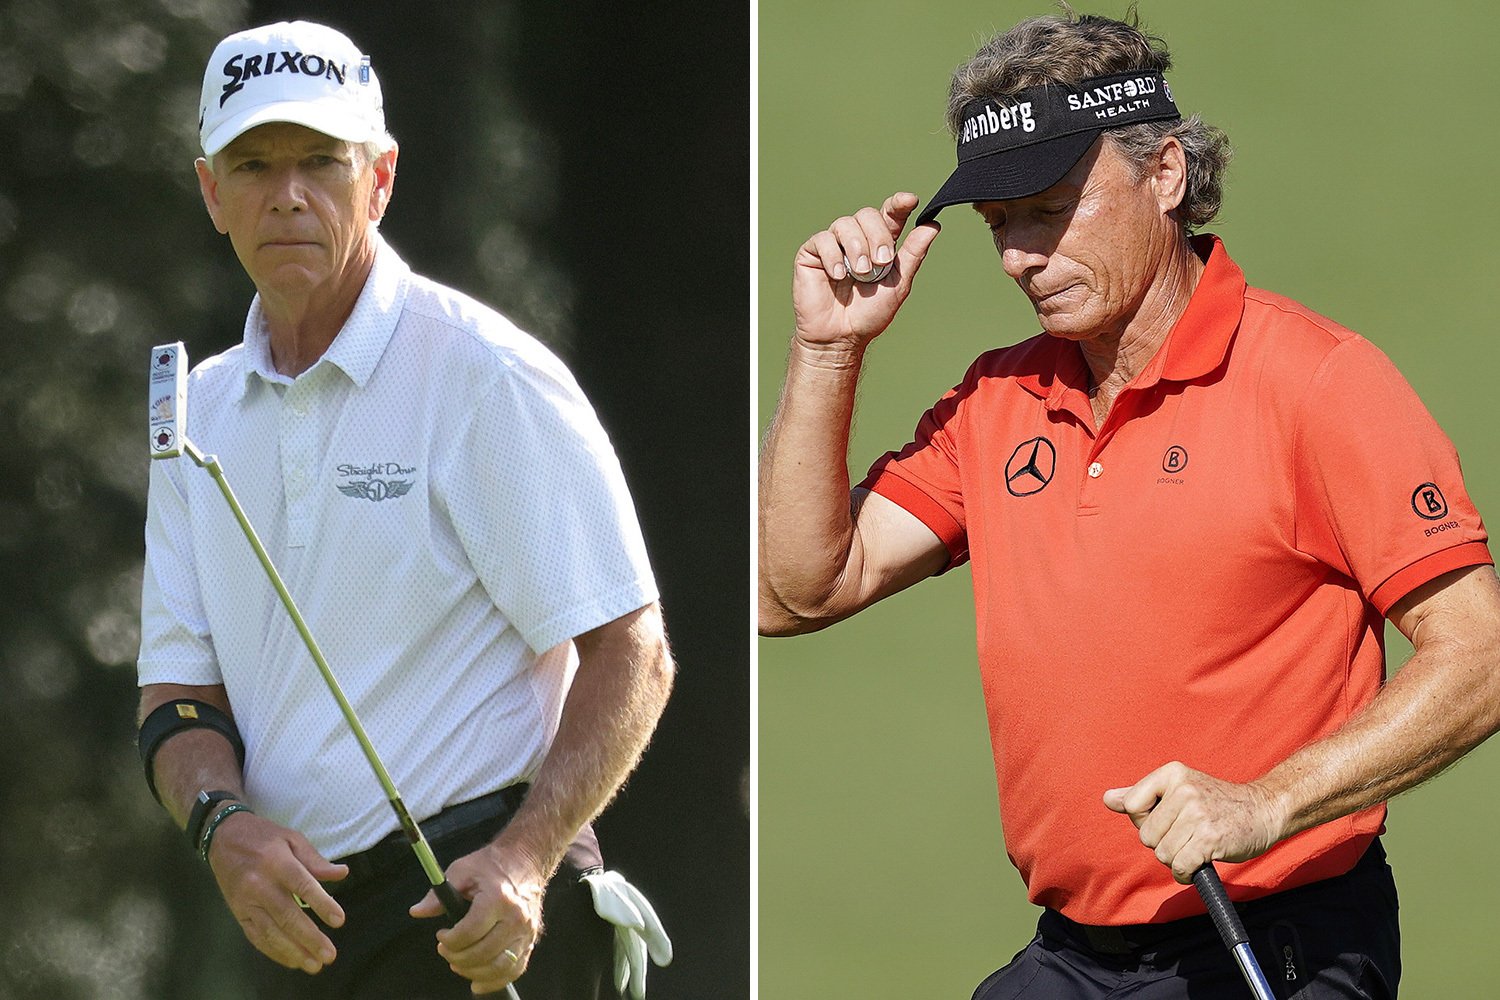 Langer & Mize roll back years to make golf history by going low at Masters